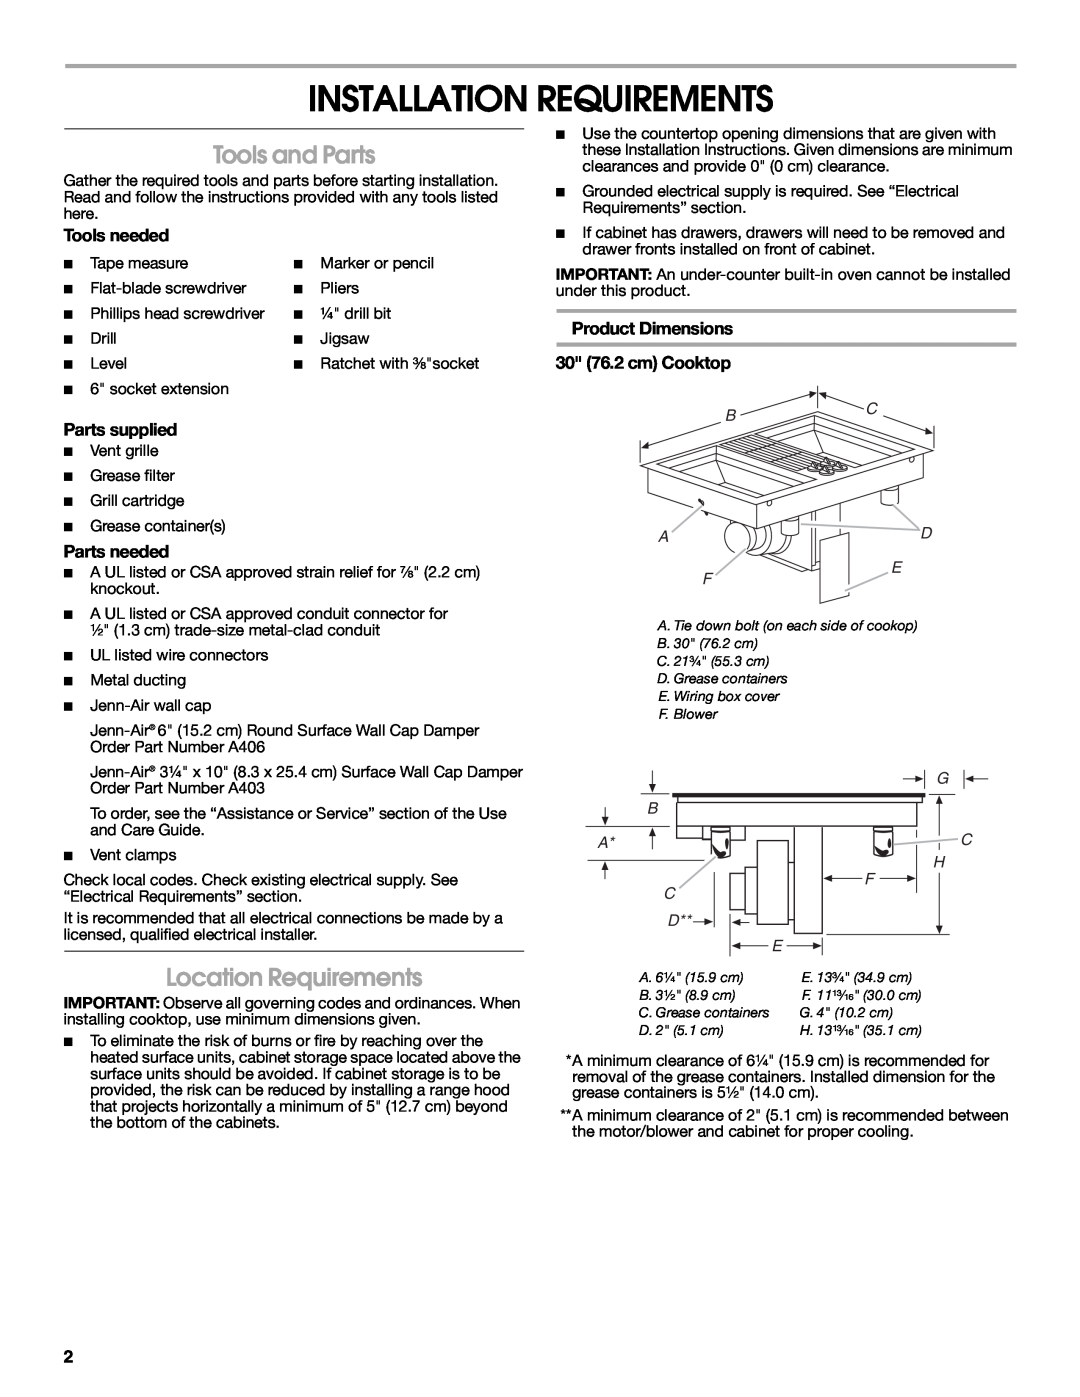 Jenn-Air W10298937A Installation Requirements, Tools and Parts, Location Requirements, Tools needed, Parts supplied, G C H 